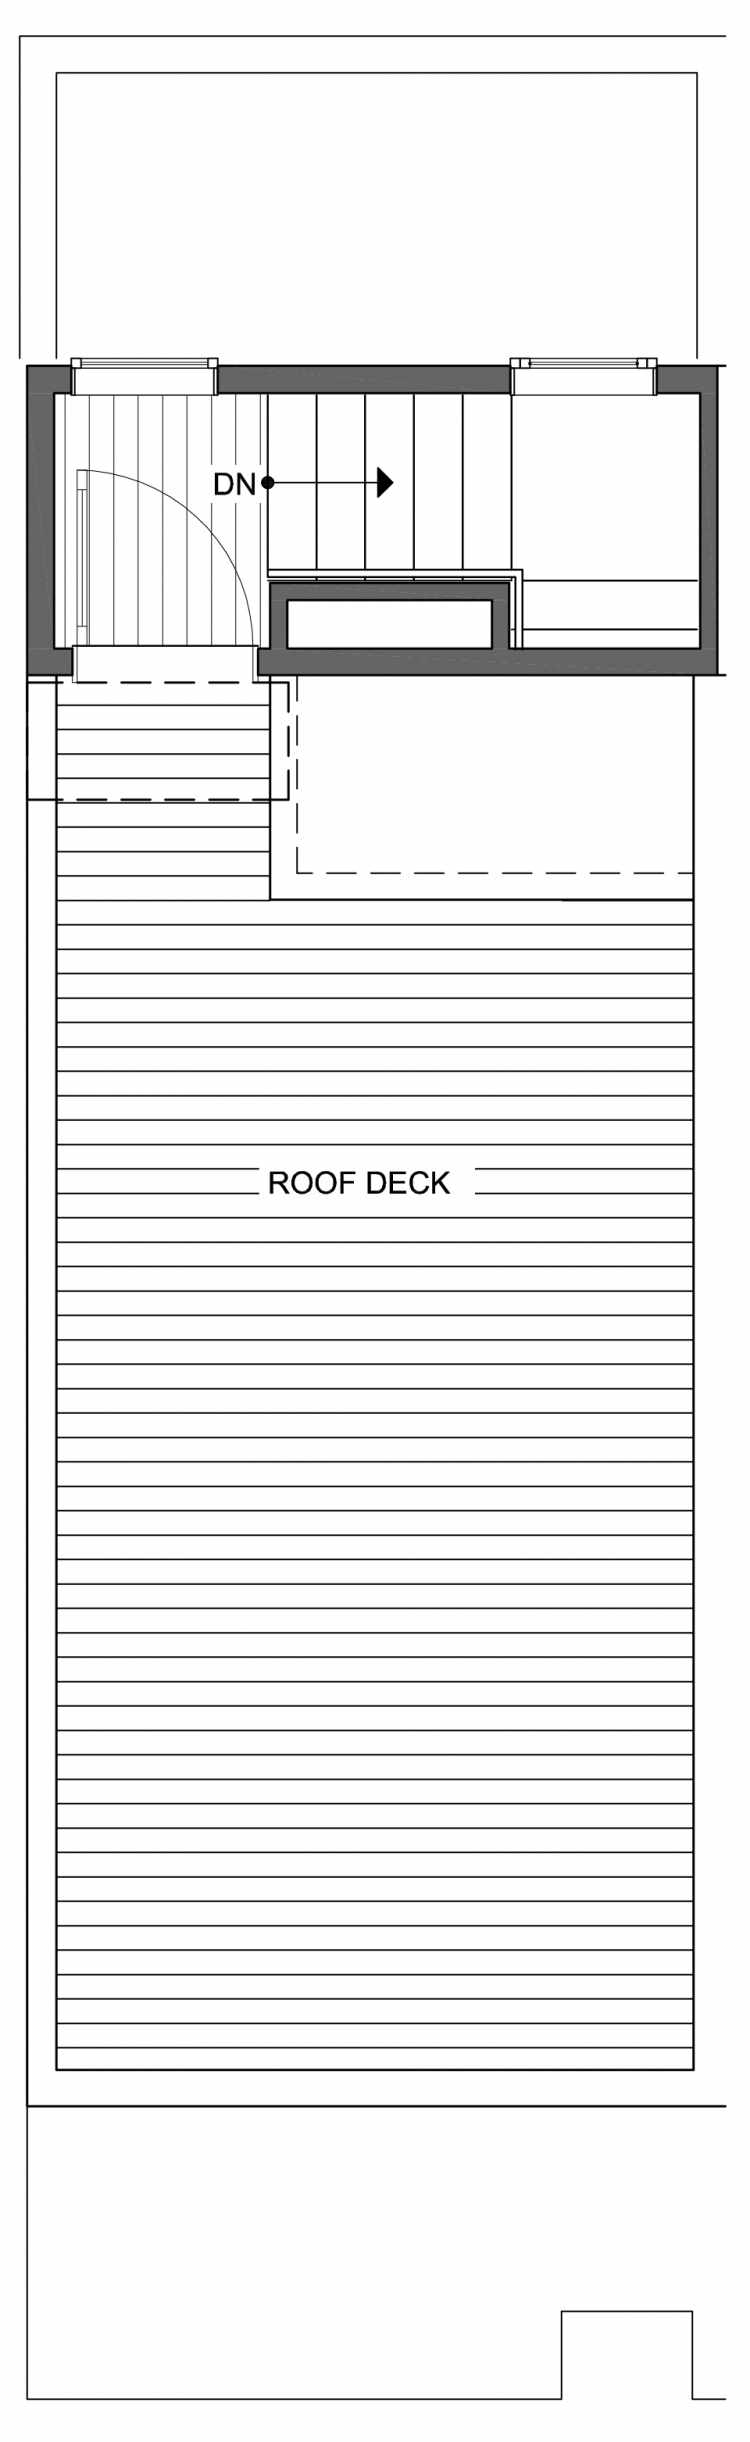 Roof Deck Floor Plan of 802 N 46th St, One of the Nino 15 West Townhomes in Fremont by Isola Homes